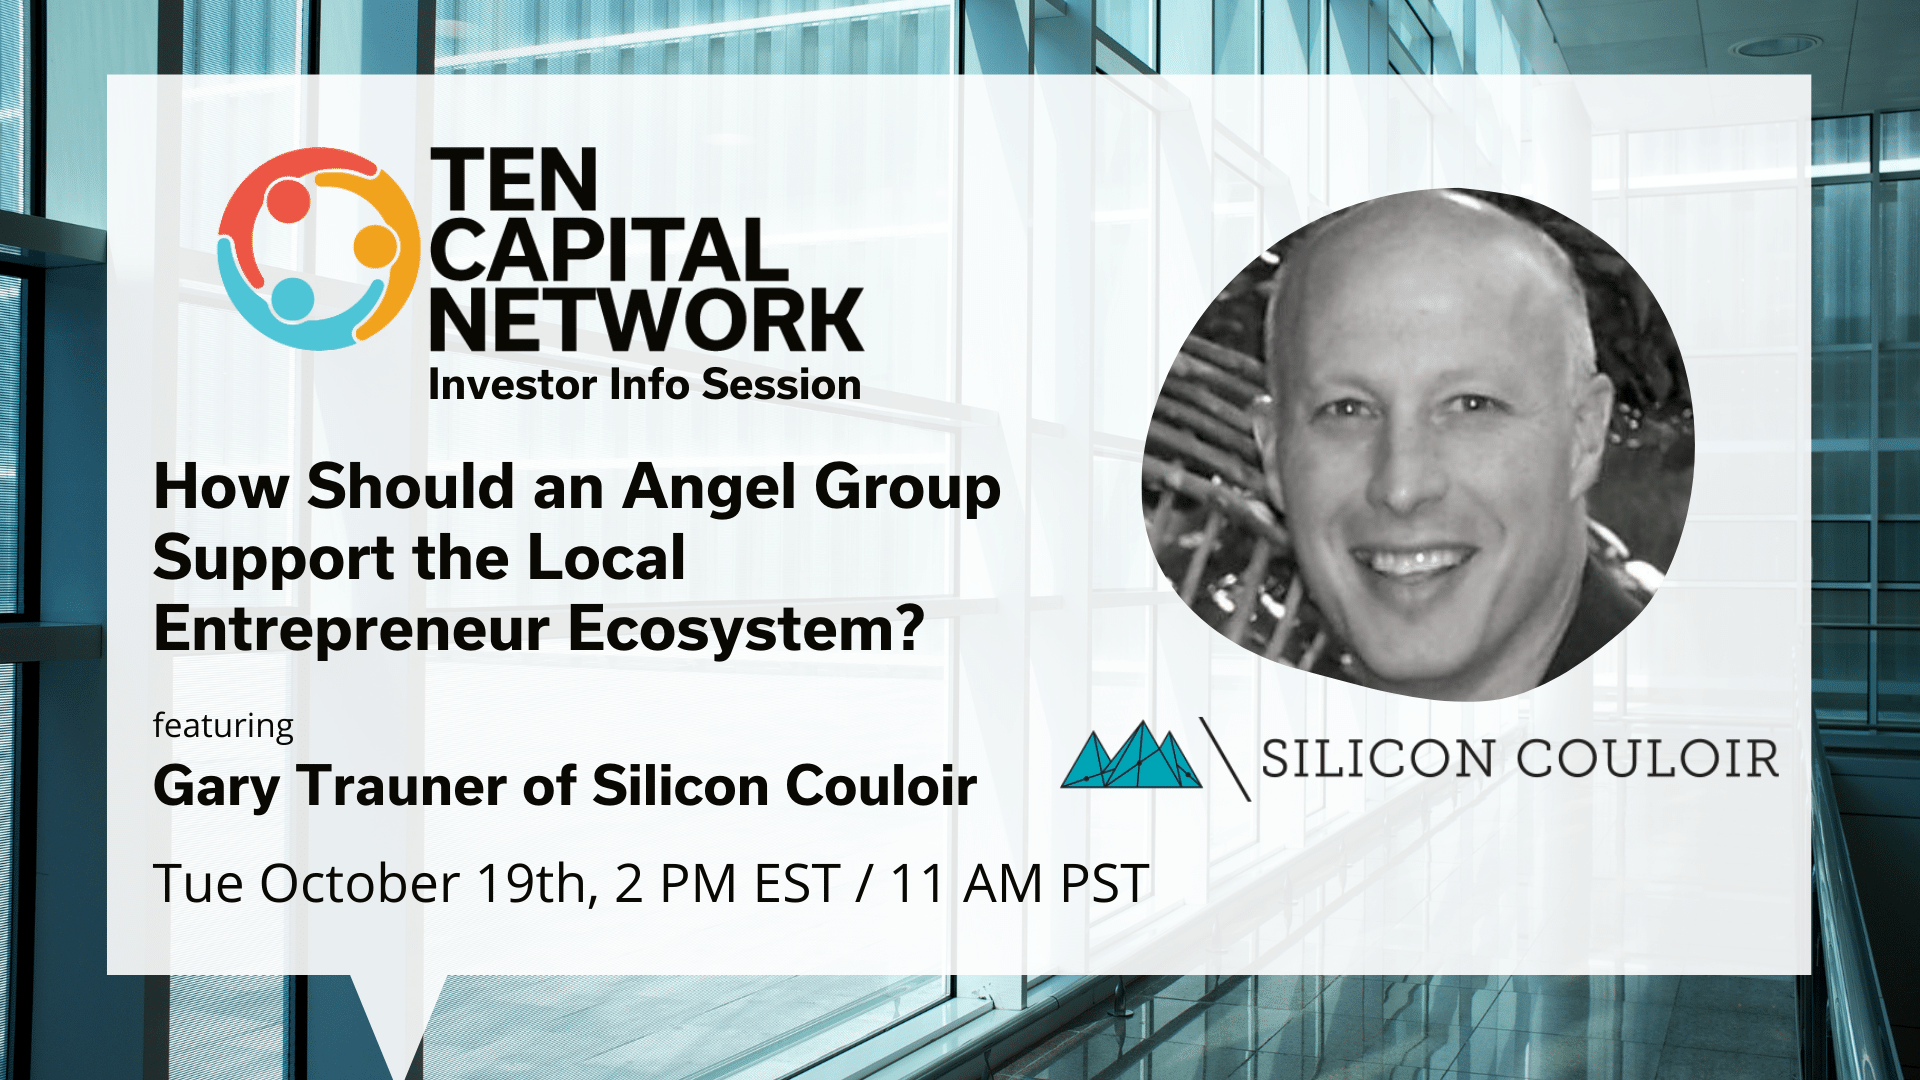 TEN Capital Investor Info Session: How Should an Angel Group Support the Local Entrepreneur Ecosystem? ft. Gary Trauner of Silicon Couloir